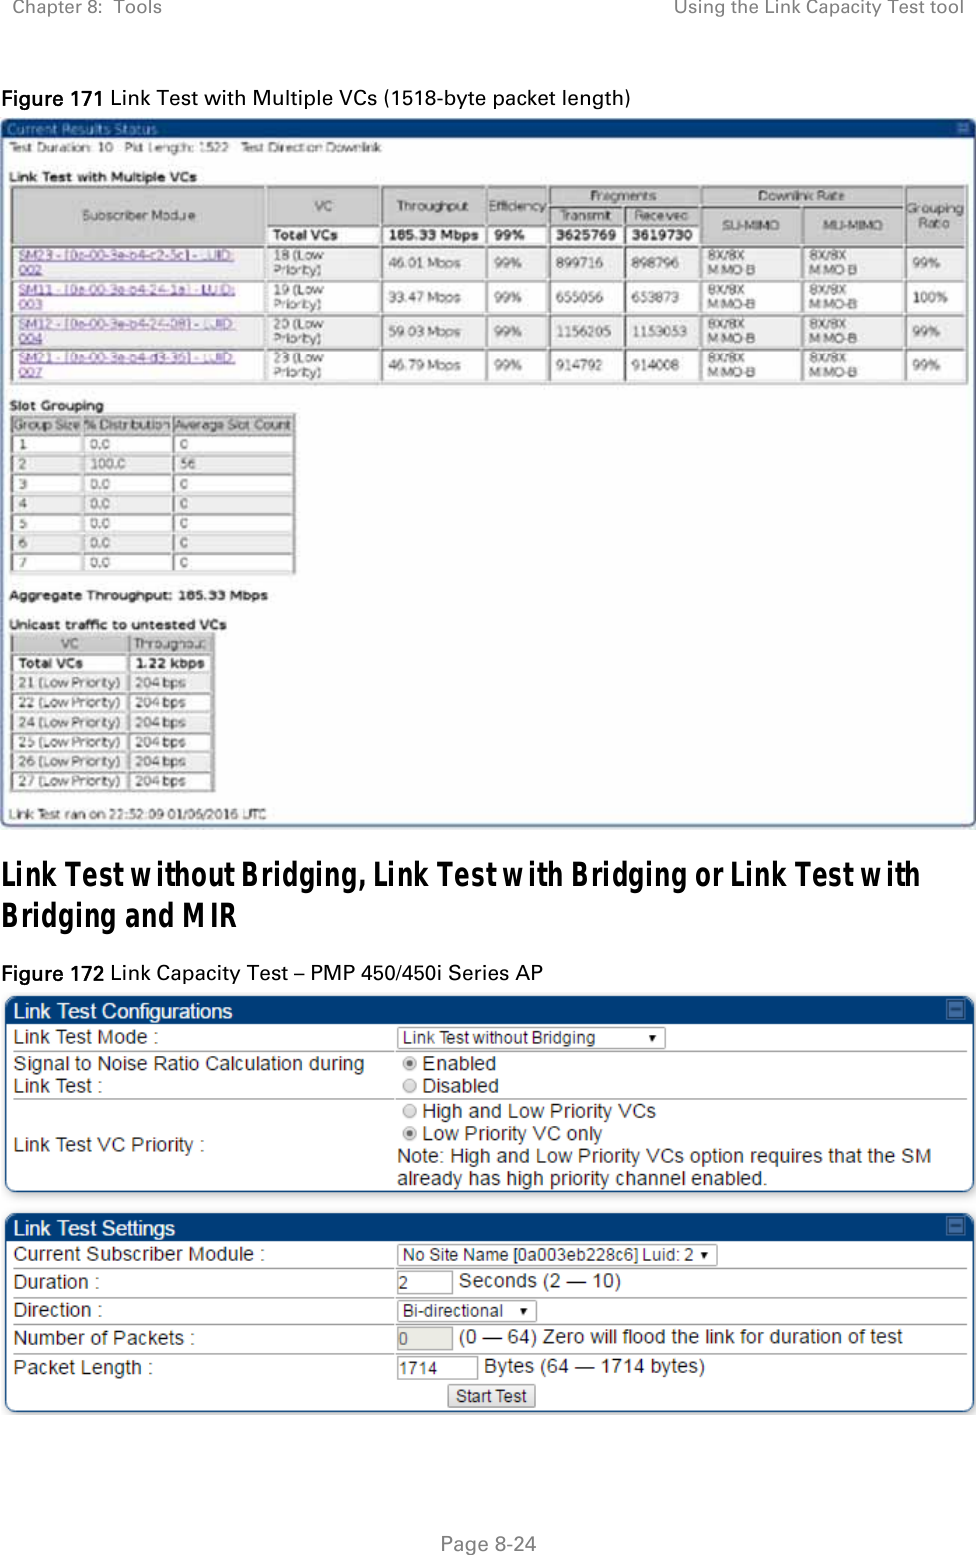 Chapter 8:  Tools  Using the Link Capacity Test tool   Page 8-24 Figure 171 Link Test with Multiple VCs (1518-byte packet length)  Link Test without Bridging, Link Test with Bridging or Link Test with Bridging and MIR Figure 172 Link Capacity Test – PMP 450/450i Series AP  